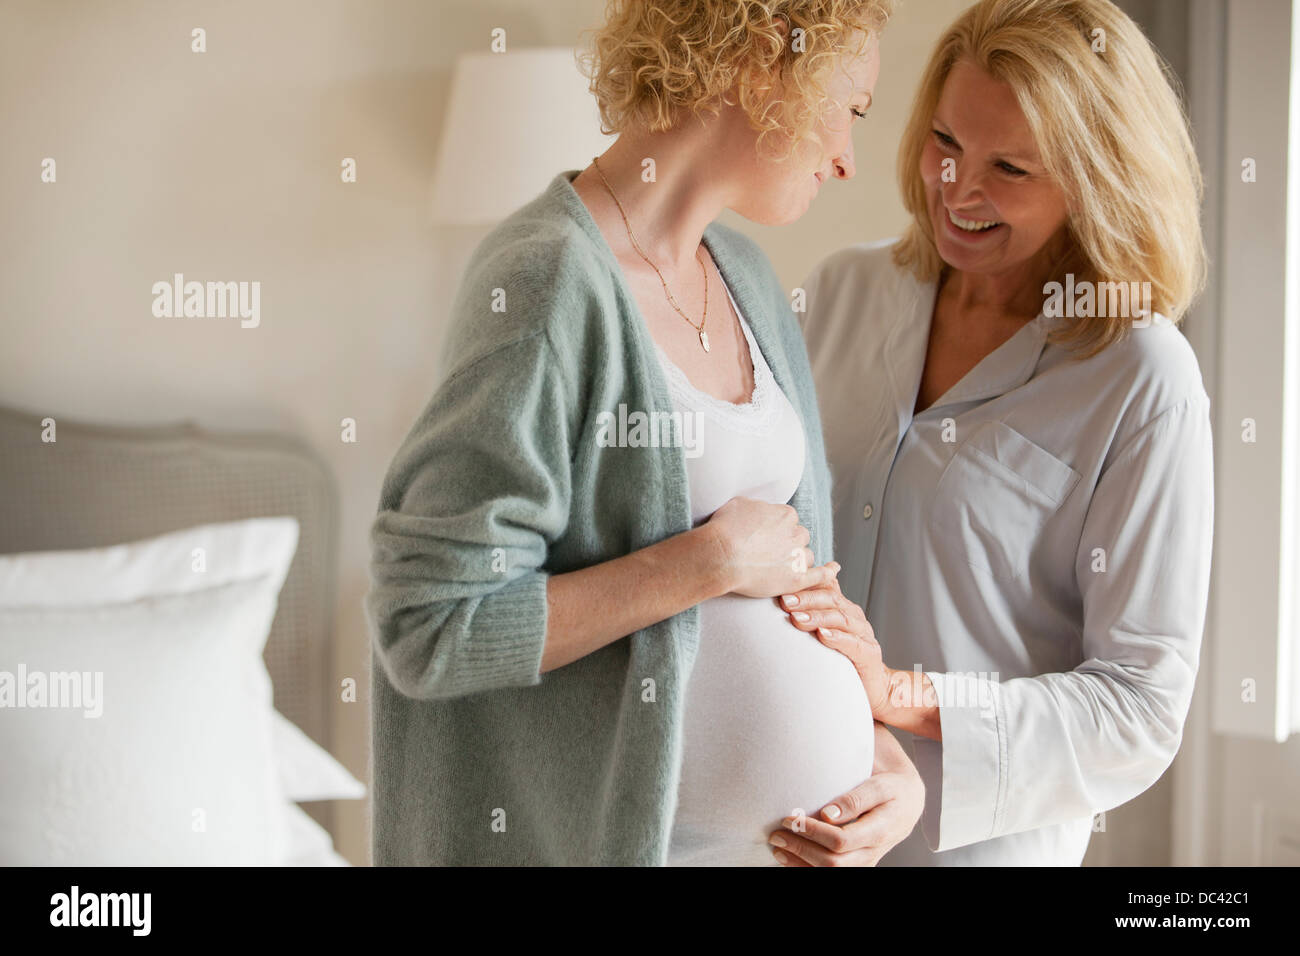 Smiling mother touching pregnant daughter's estomac Banque D'Images